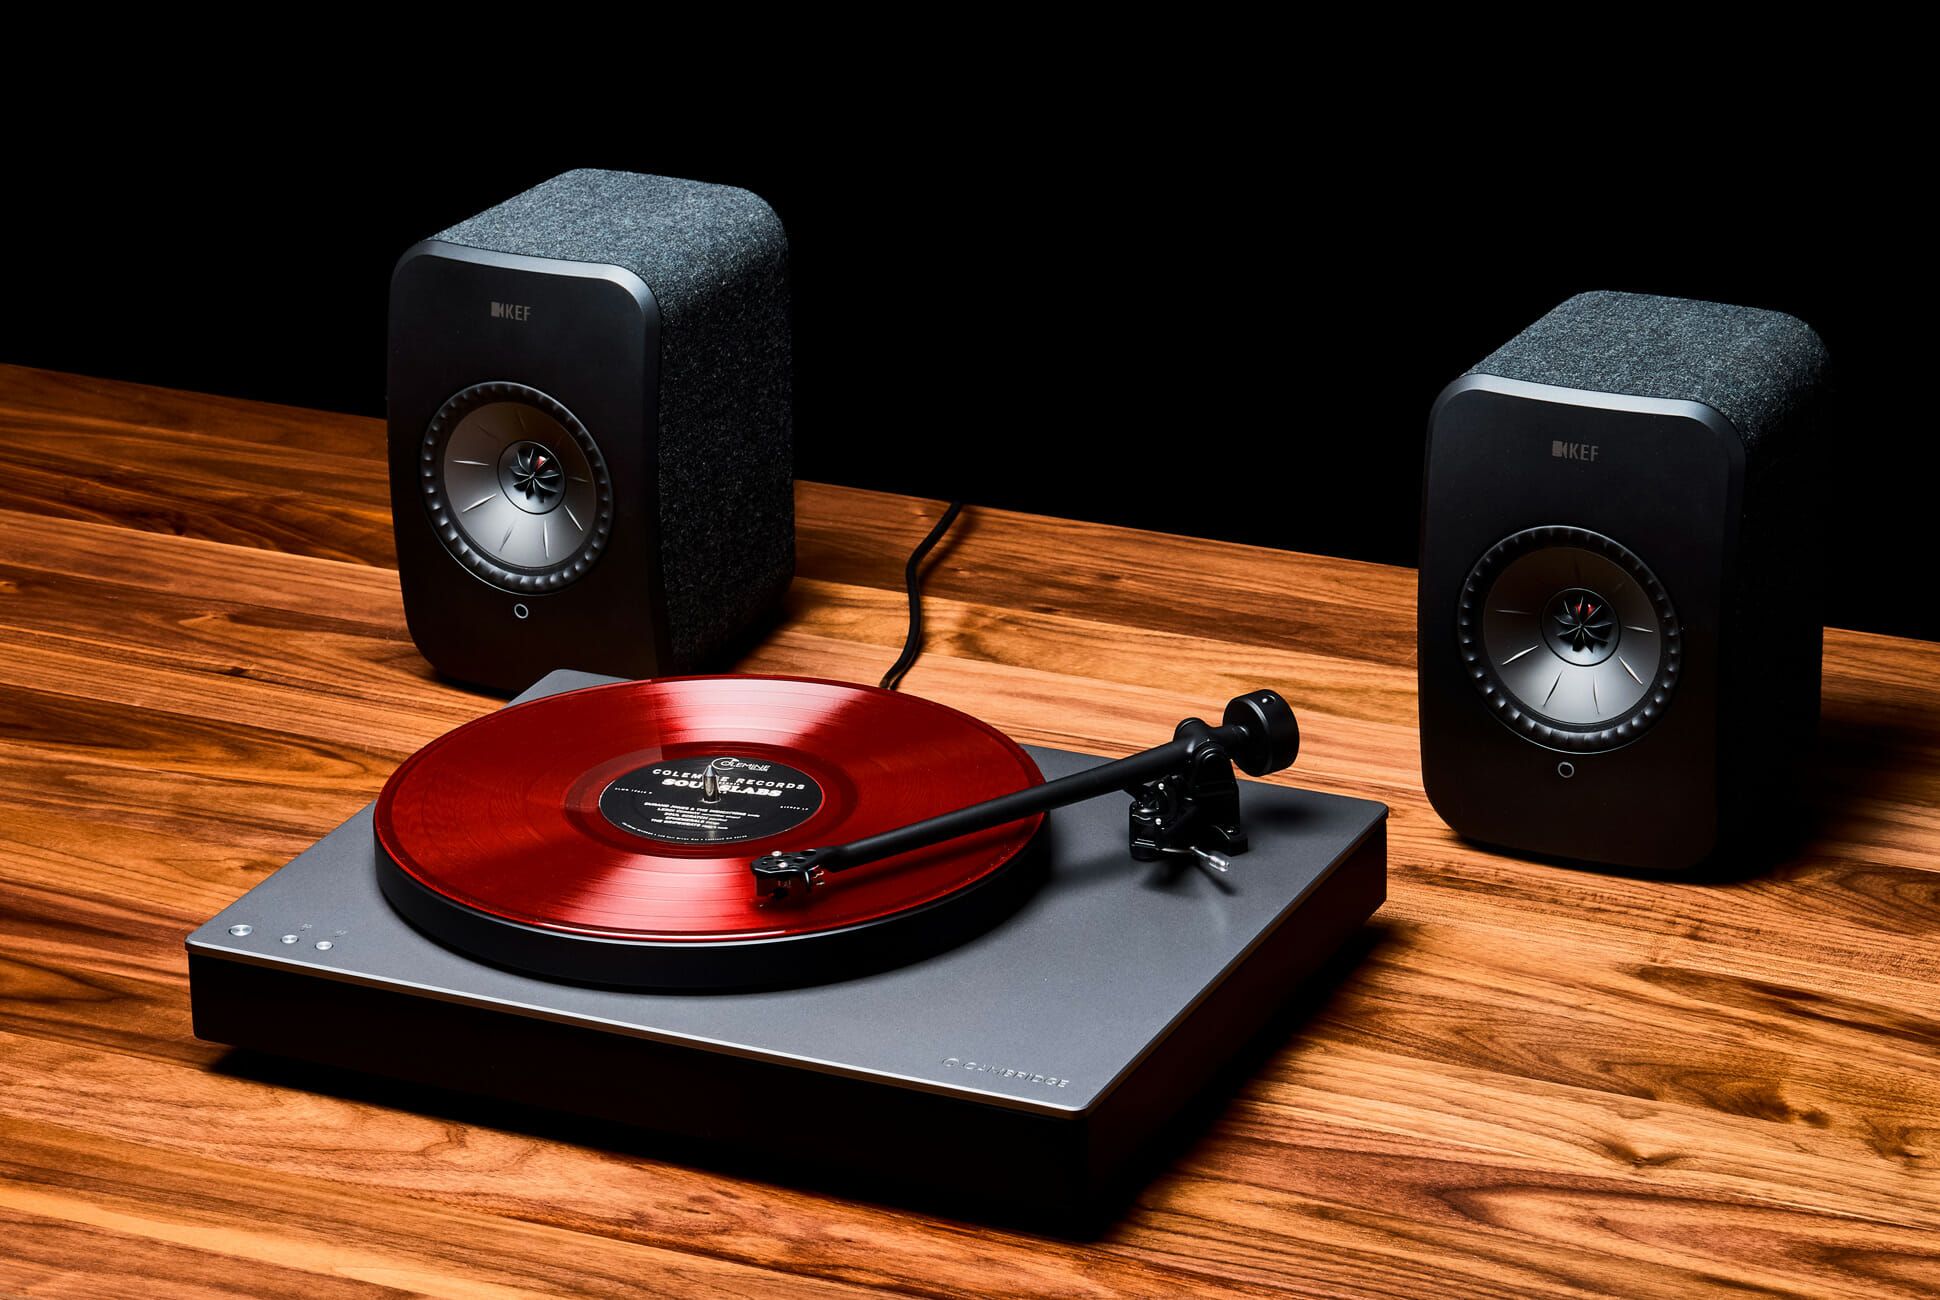 self powered speakers for turntable